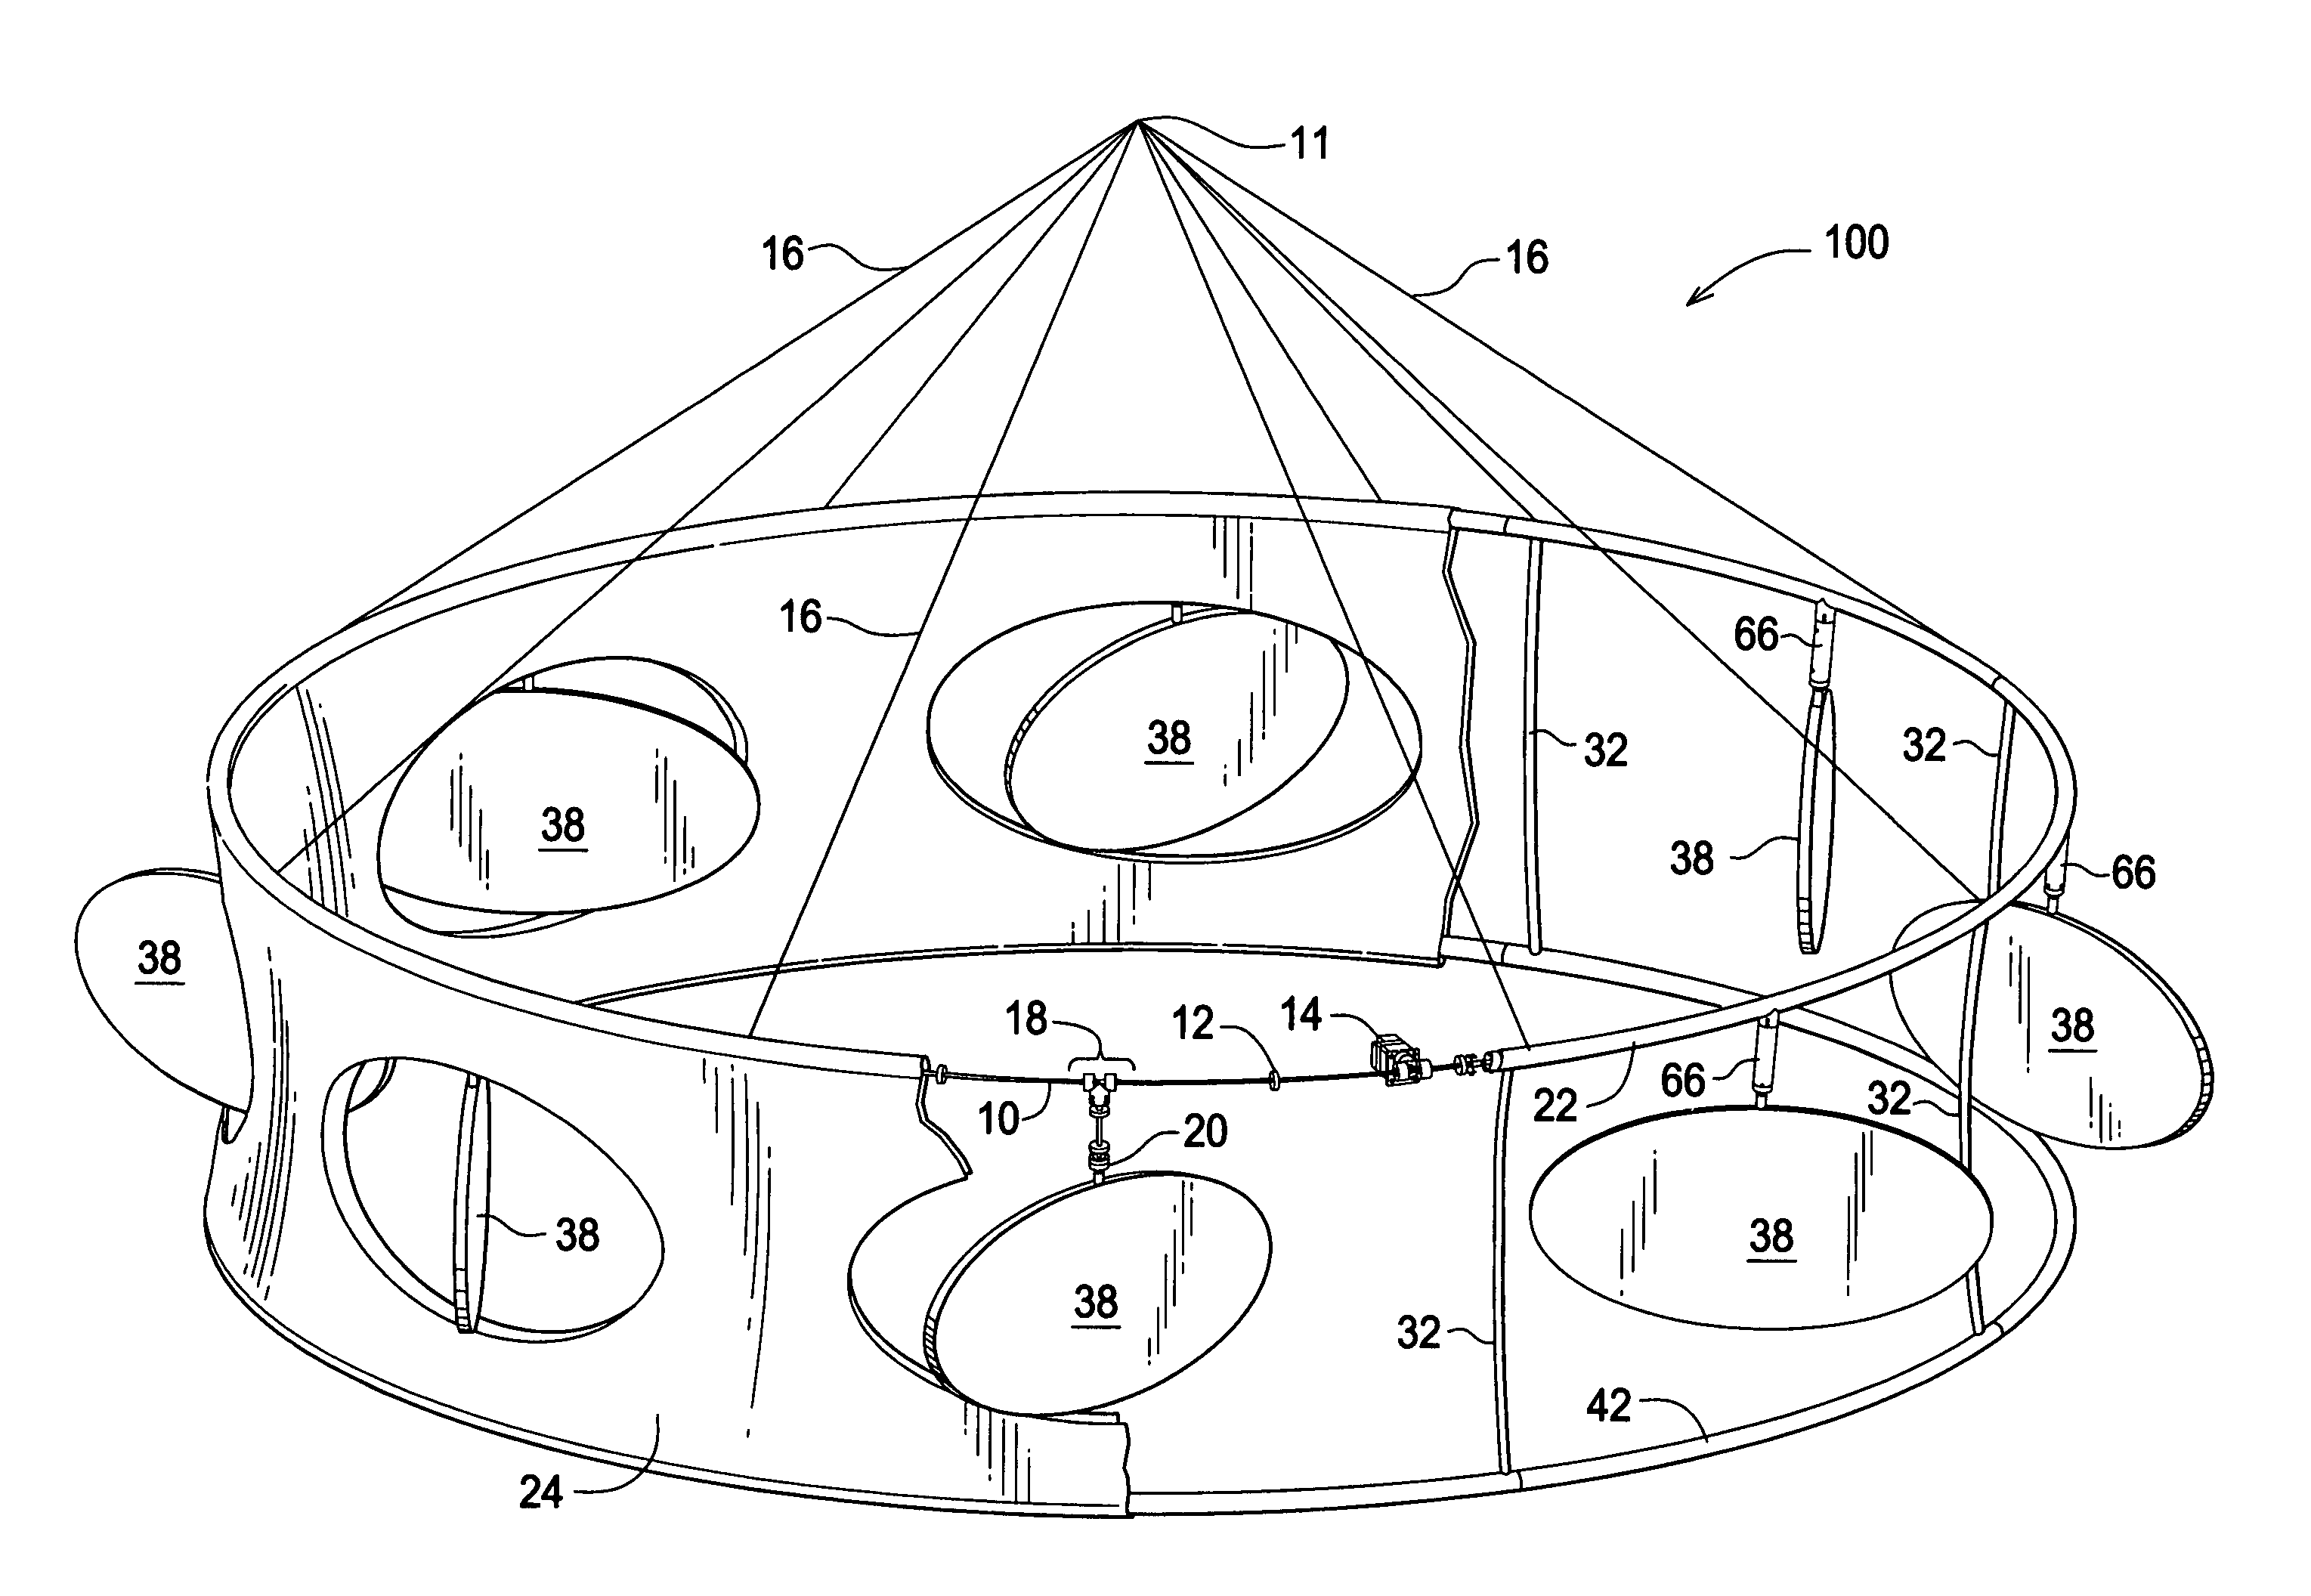 Display structure with moving attraction elements